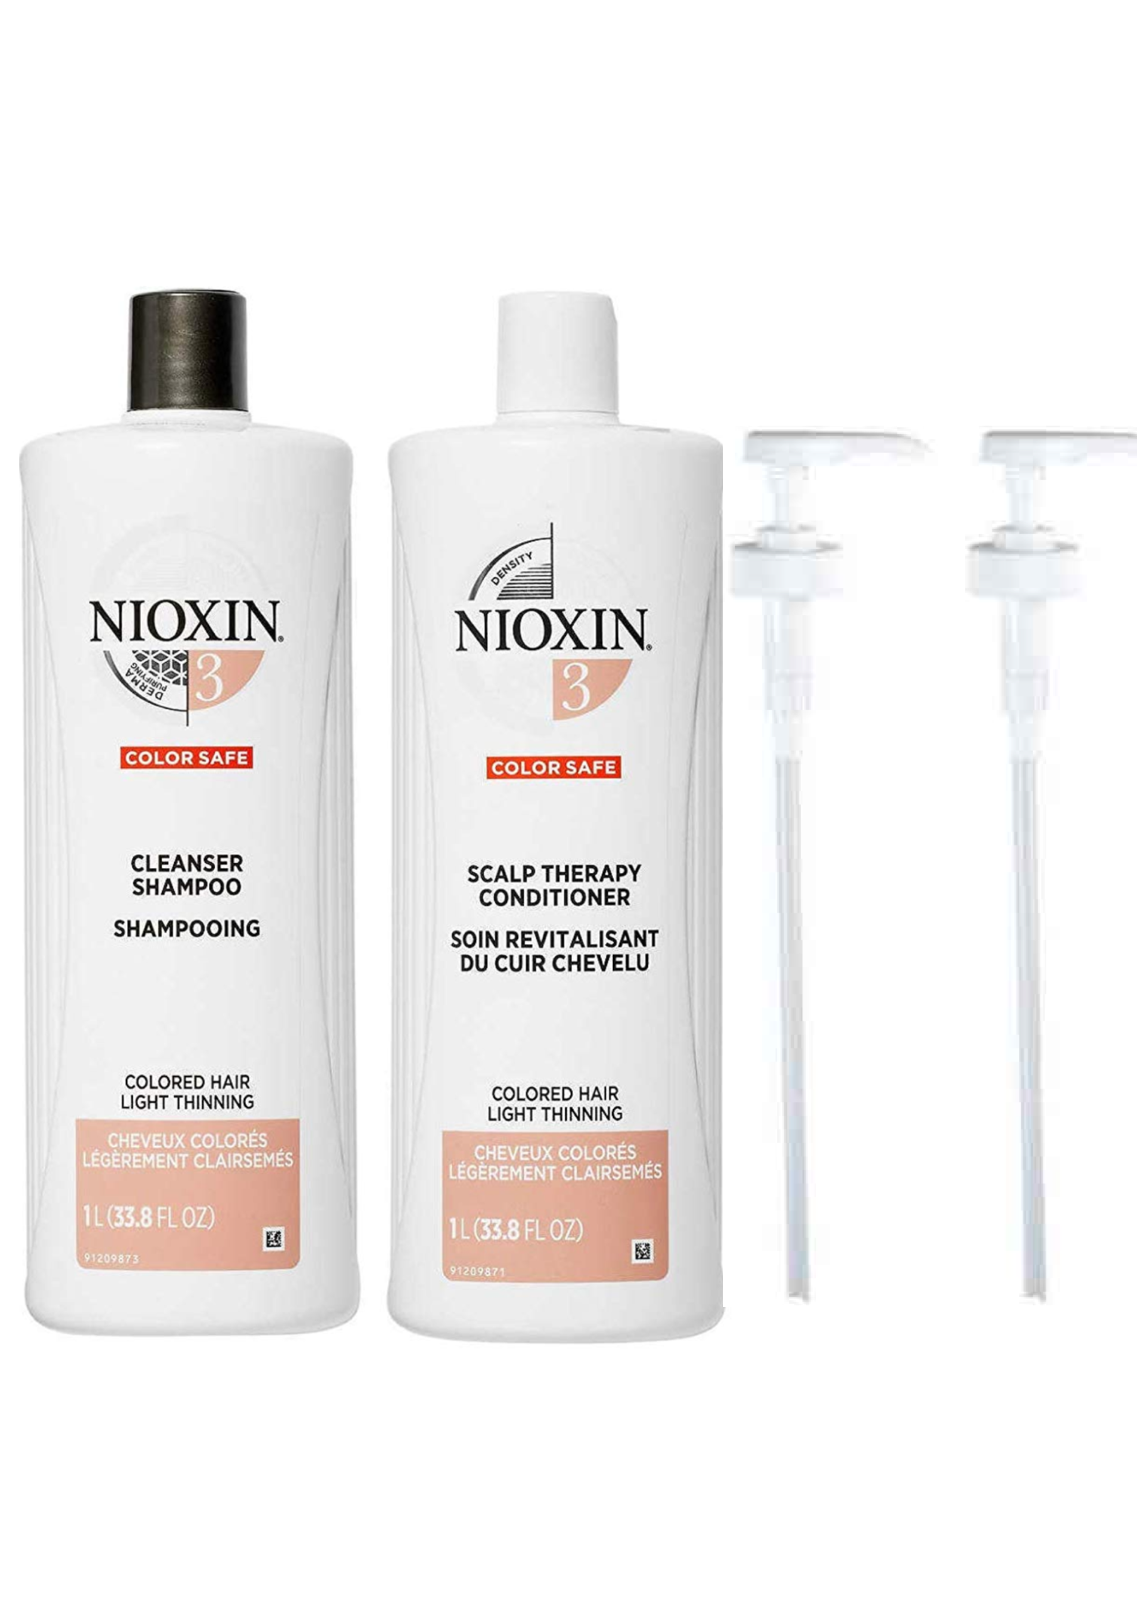 Nioxin System 3 Cleanser  & Scalp Therapy conditioner 33.8oz Duo 2 Pumps - $47.99